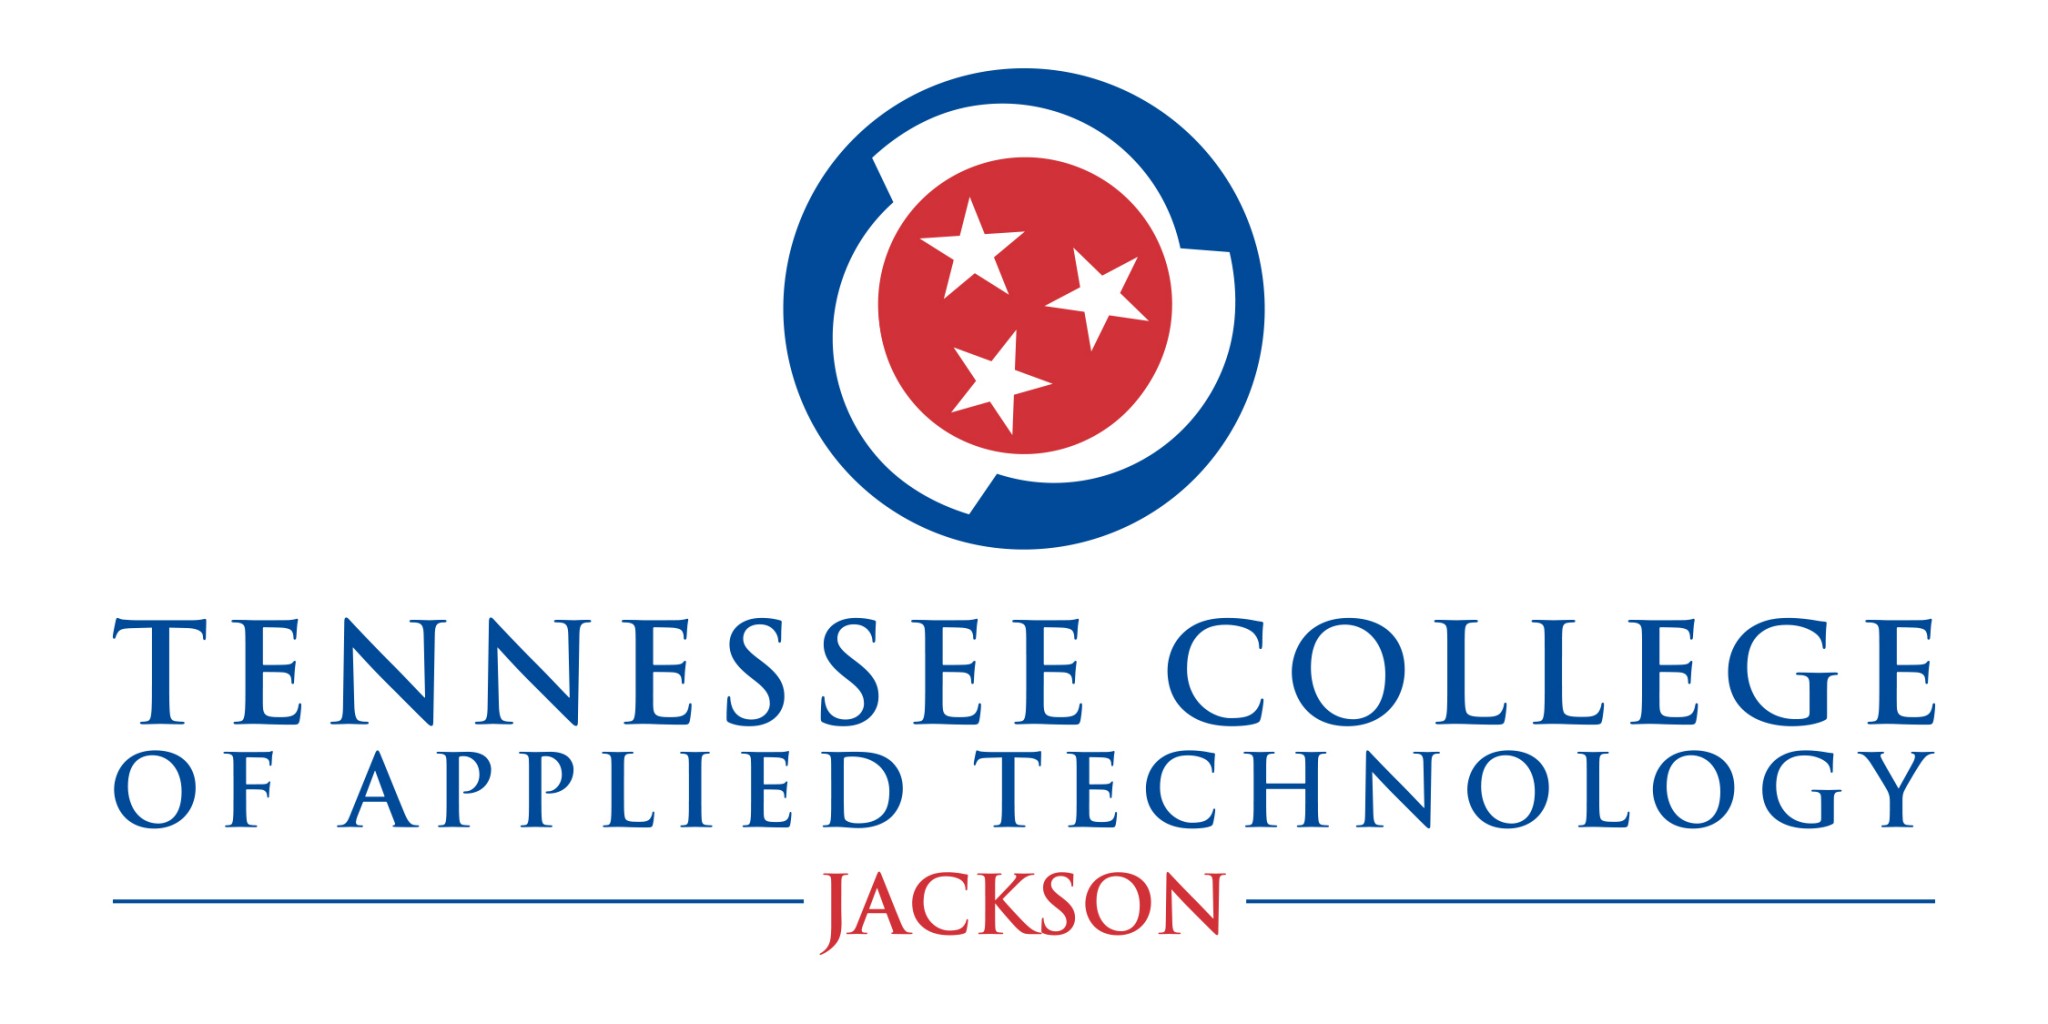 Tennessee College of Applied Technology, Jackson